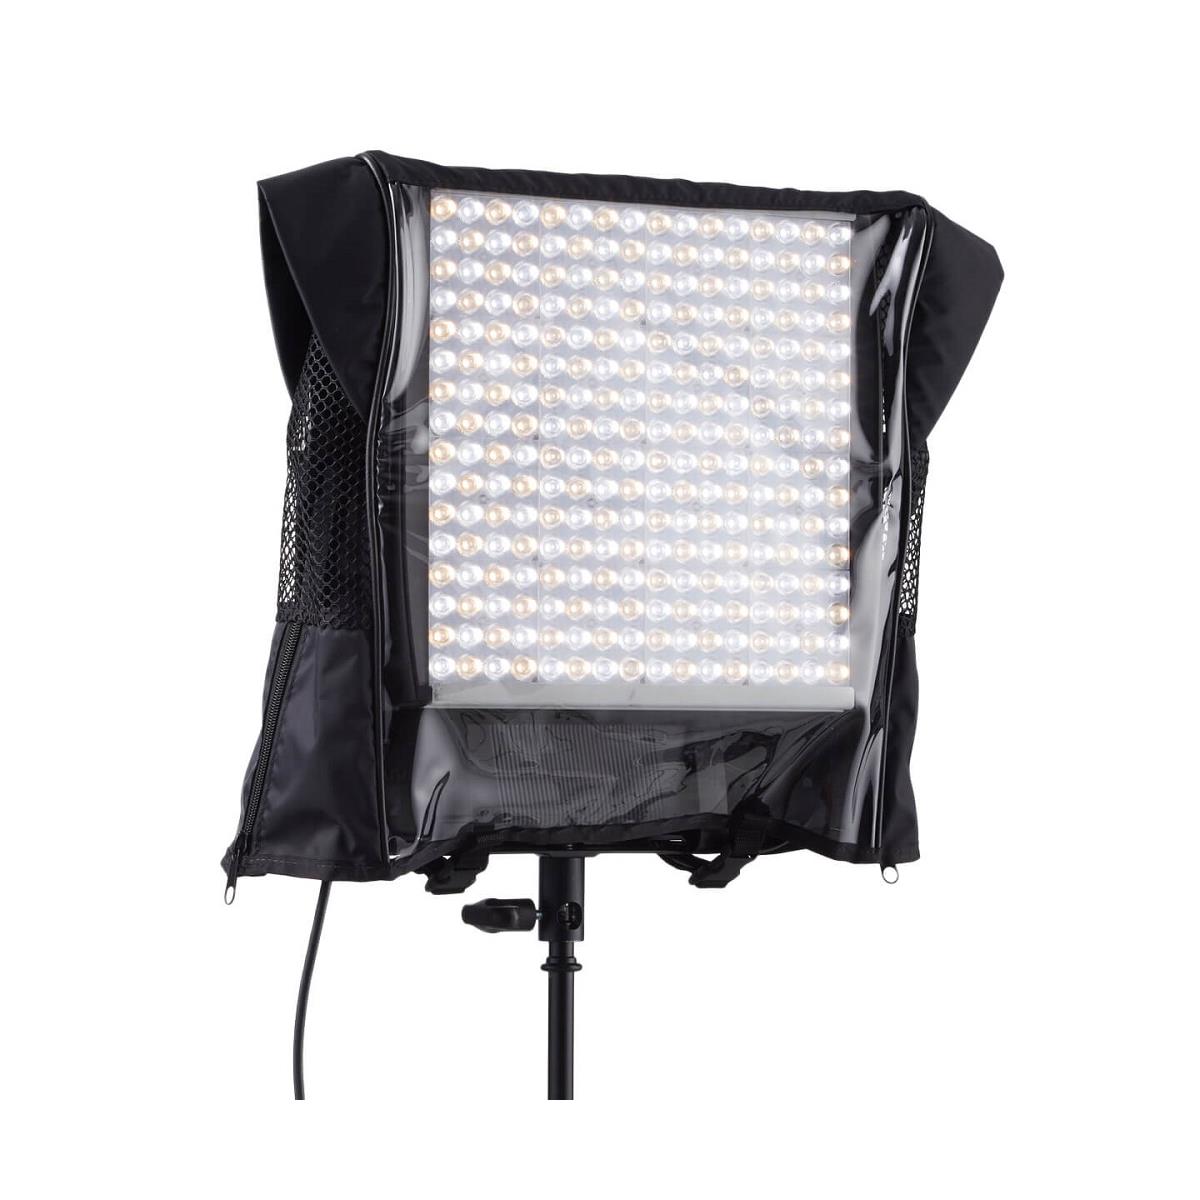 Image of Litepanels Fixture Cover for Astra 1x1 Light